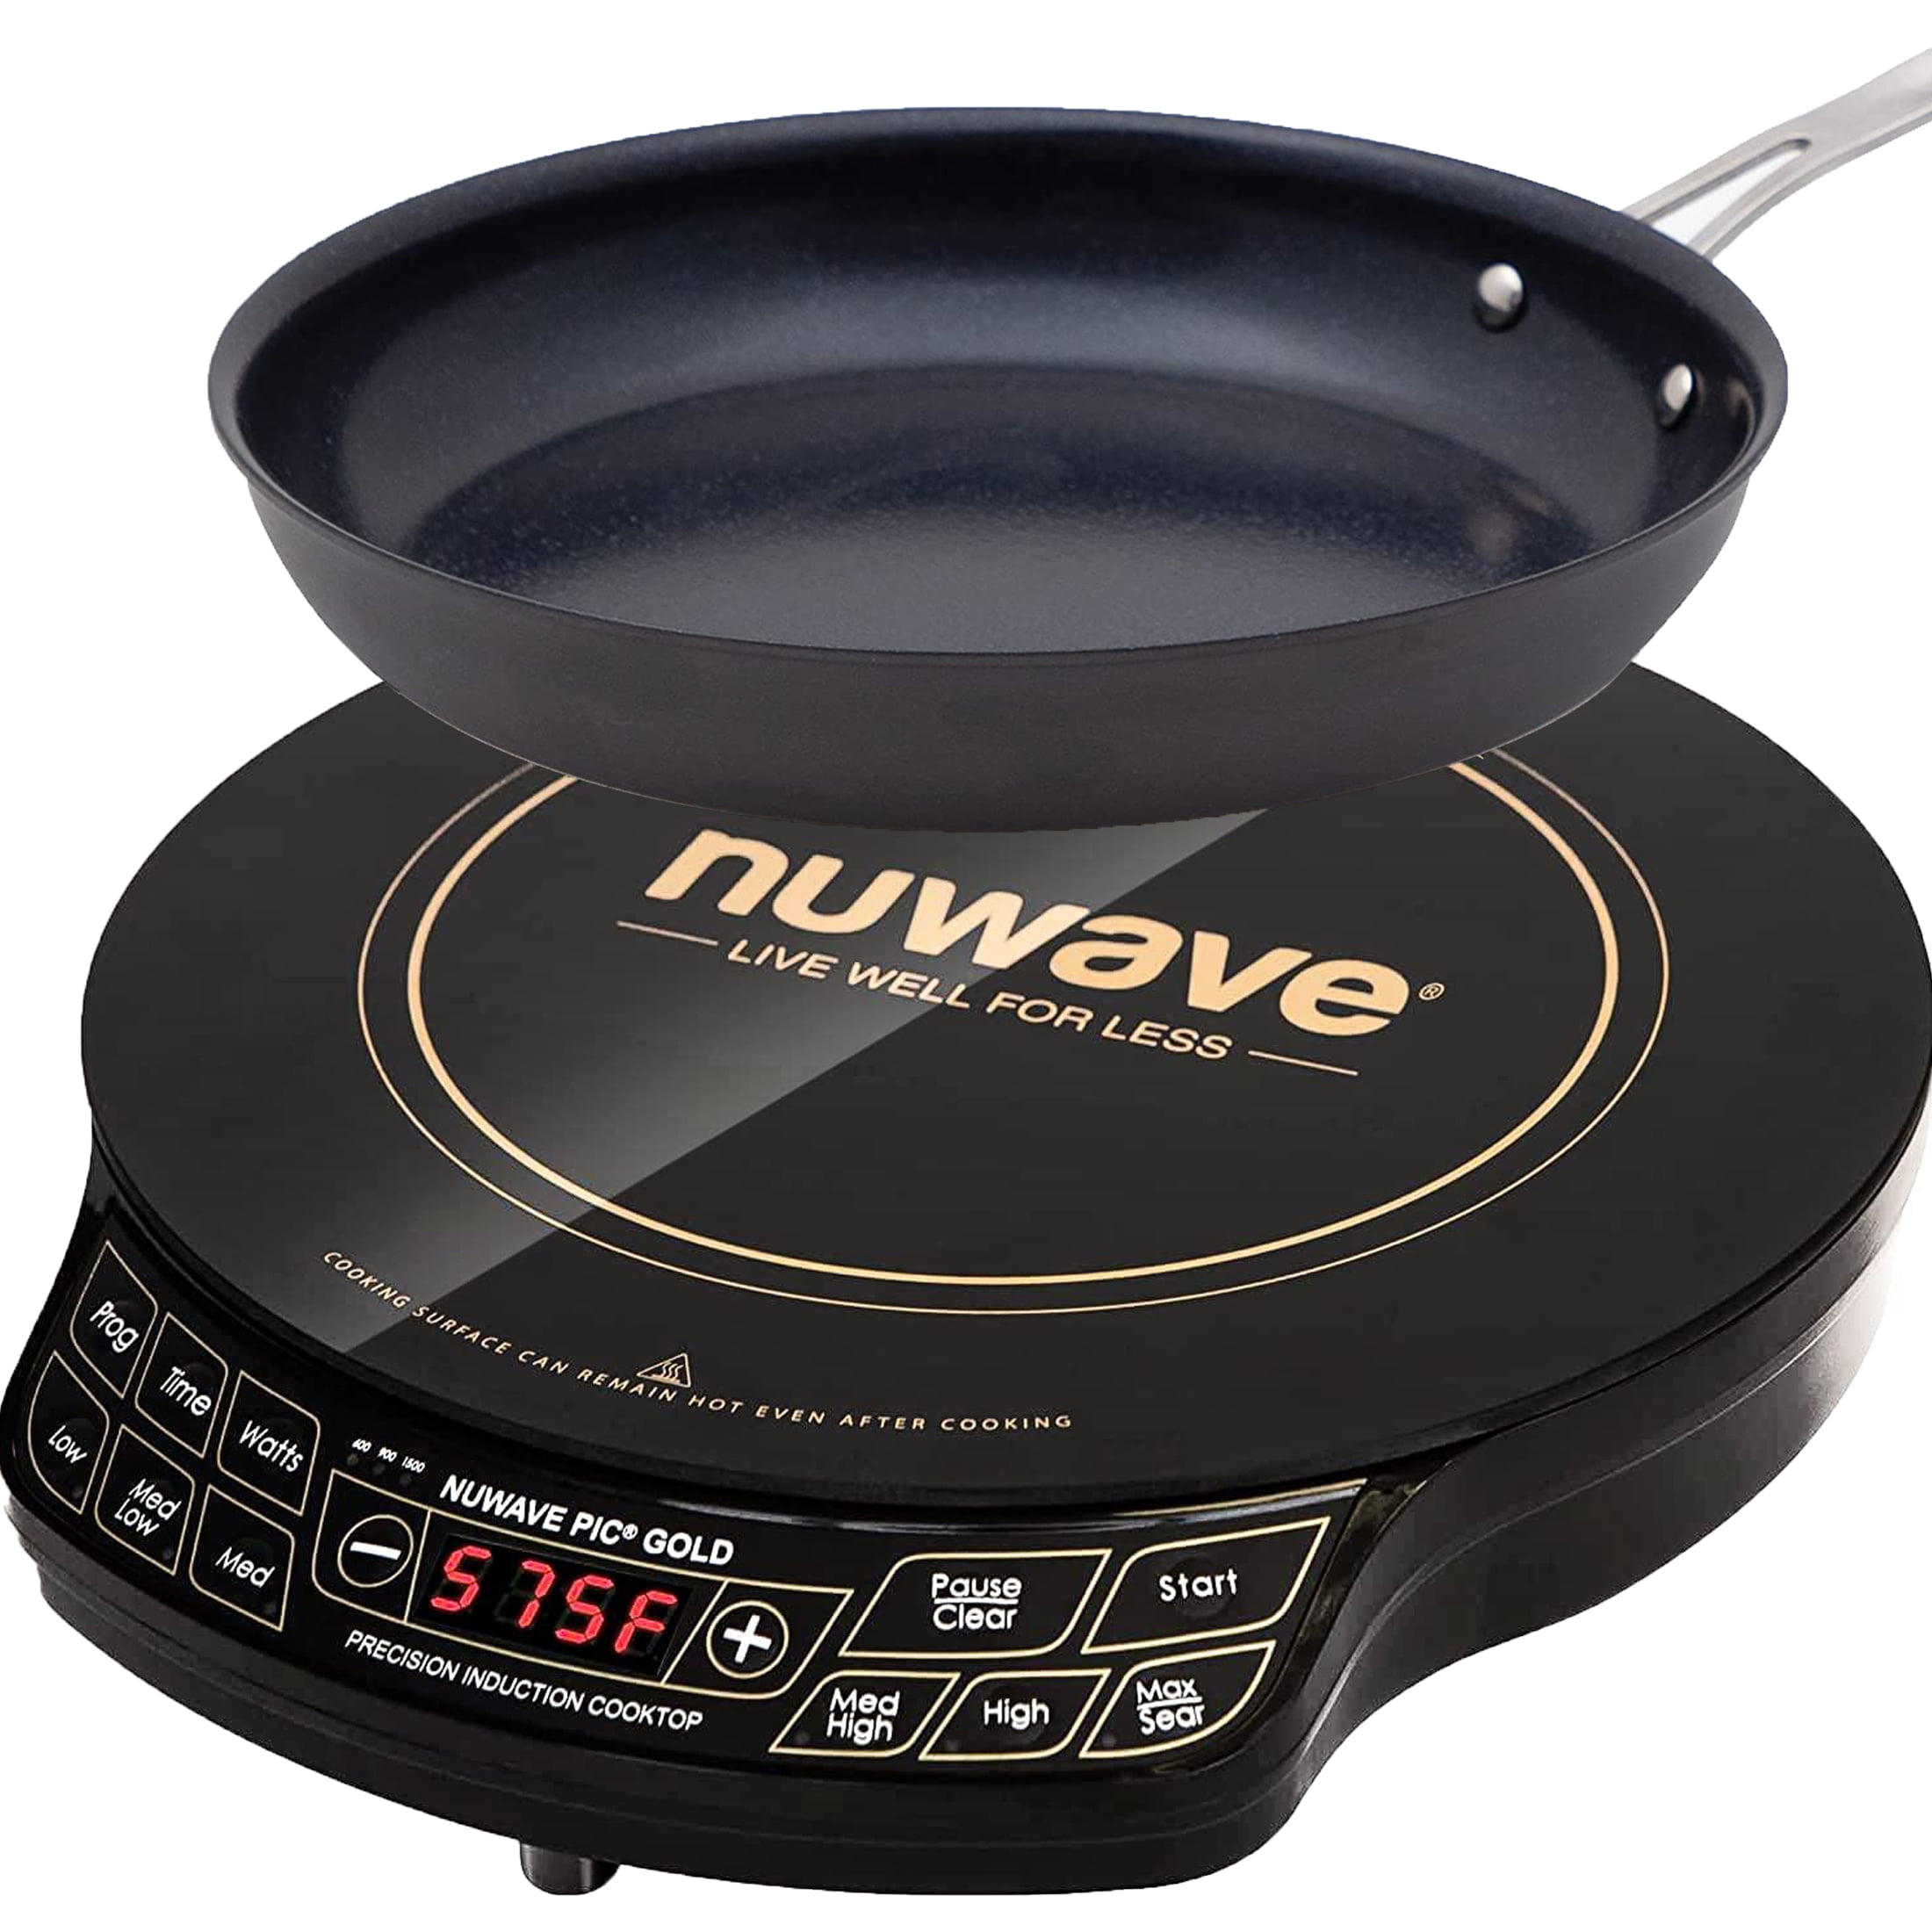 Electric party wok set with mini wok pans for 6 people, 600 watts